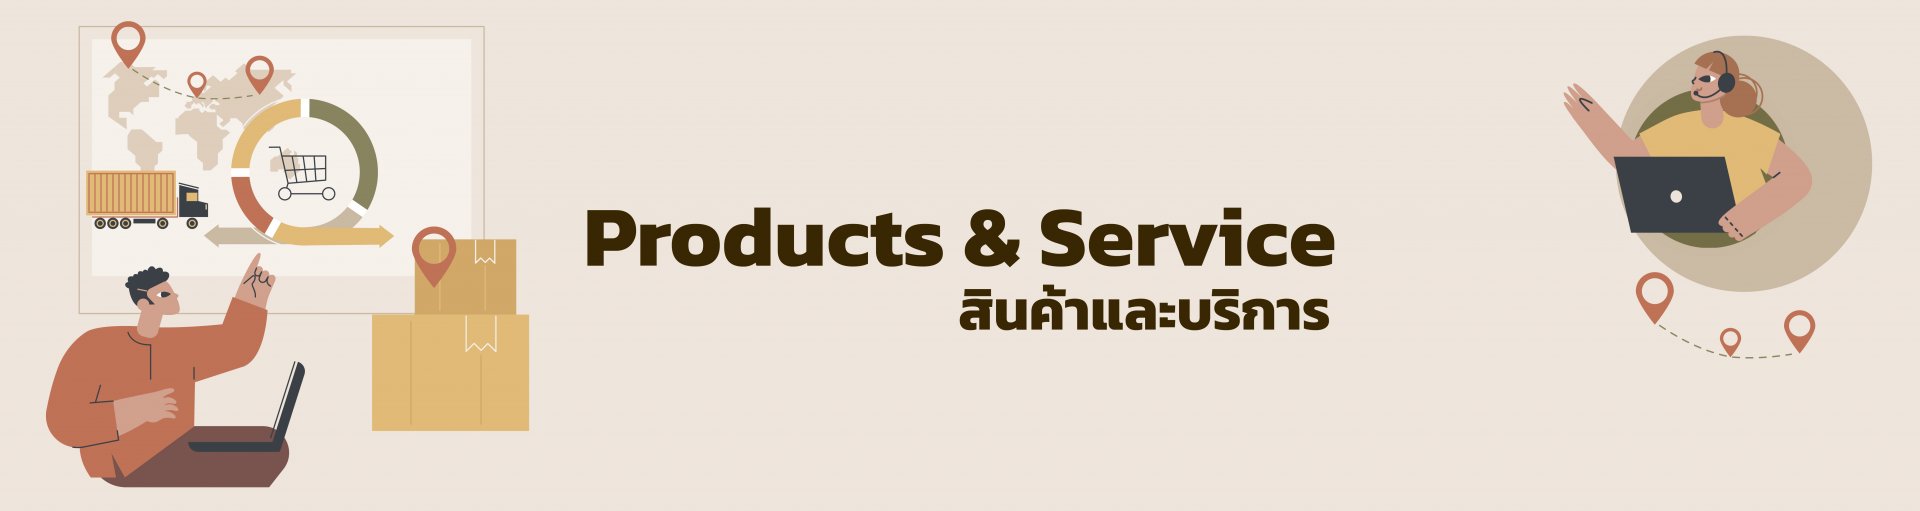 products & Service 